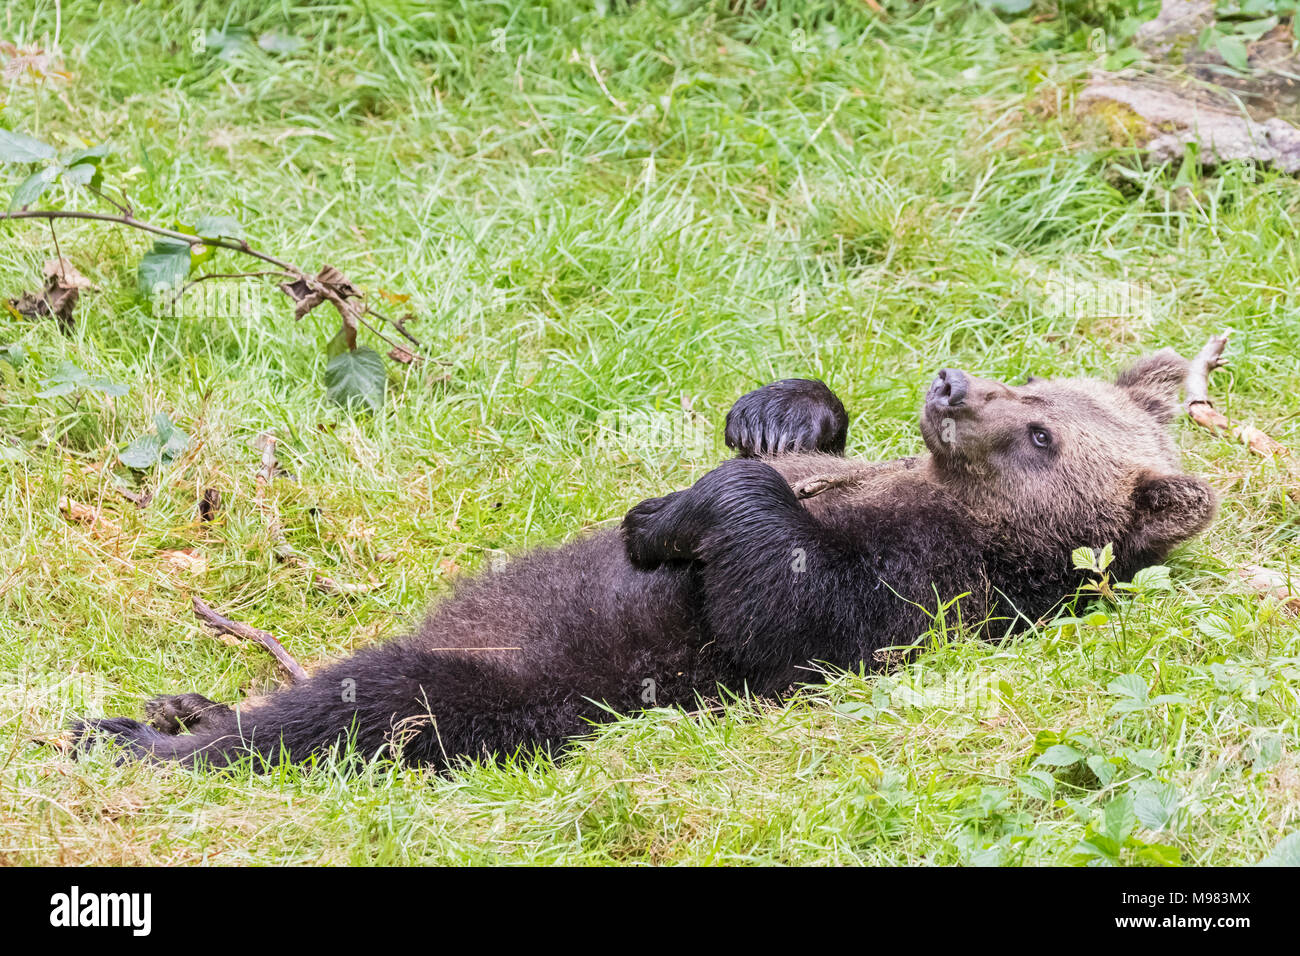 Germany, Bavarian Forest National Park, animal Open-air site Neuschoenau, brown bear, Ursus arctos, young animal lying in grass Stock Photo